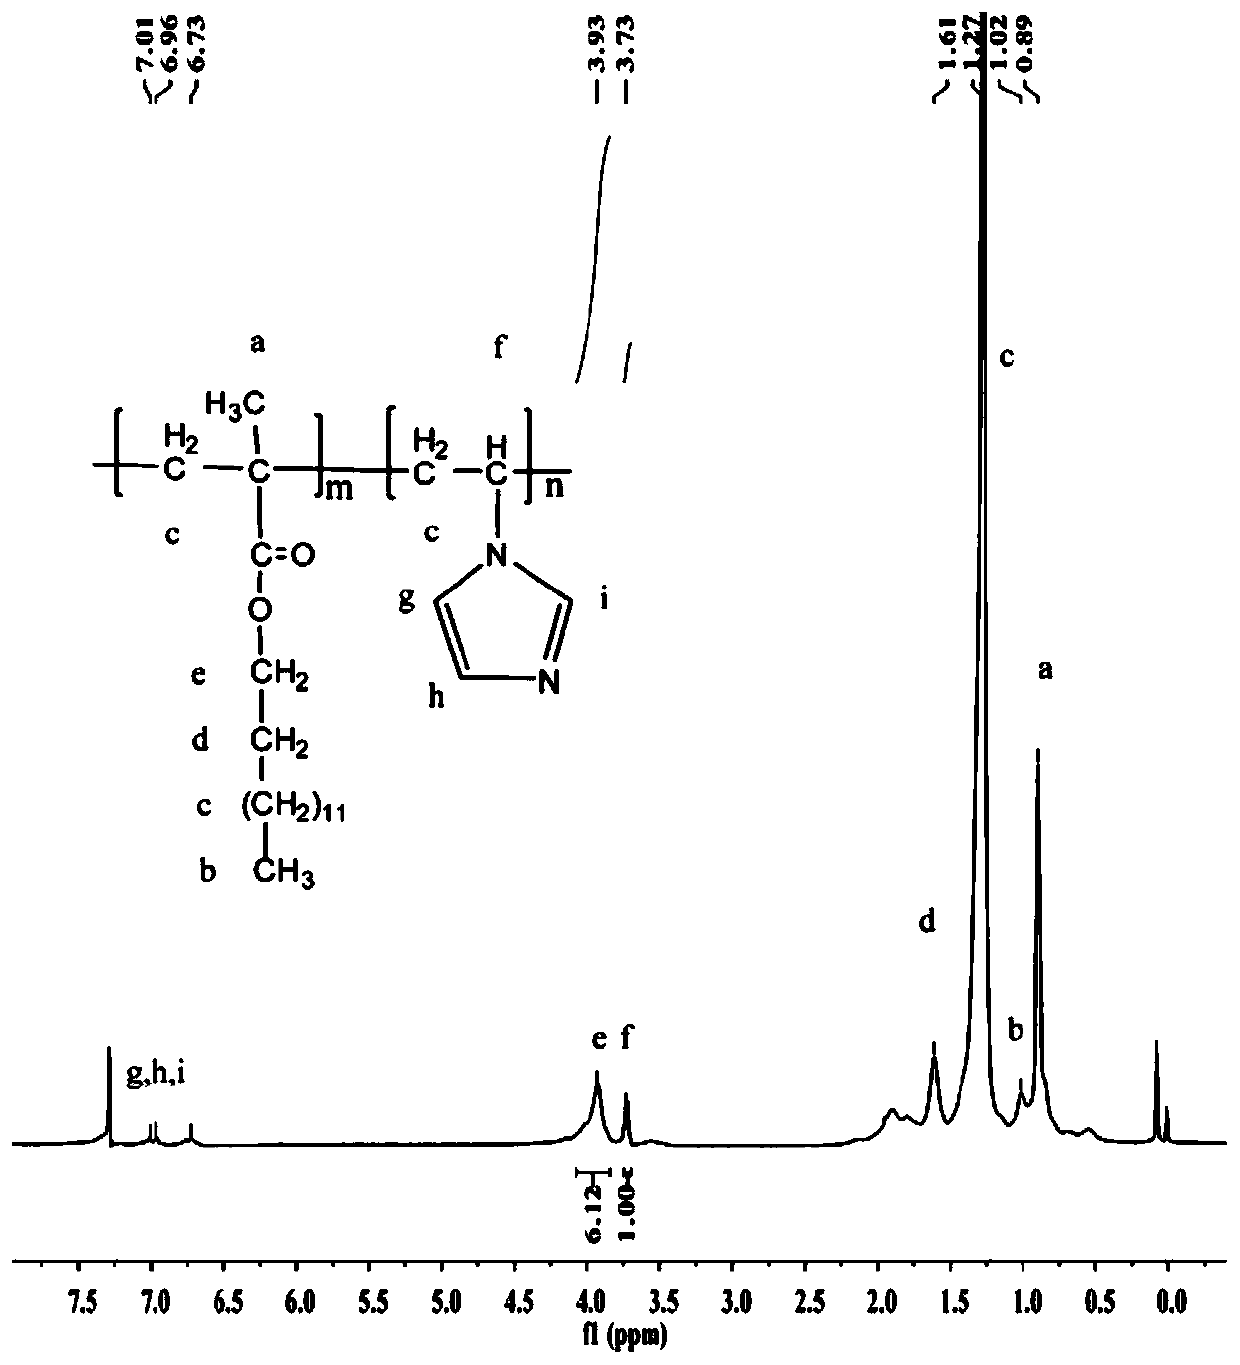 Compounded diesel pour point depressant, and preparation method and application thereof